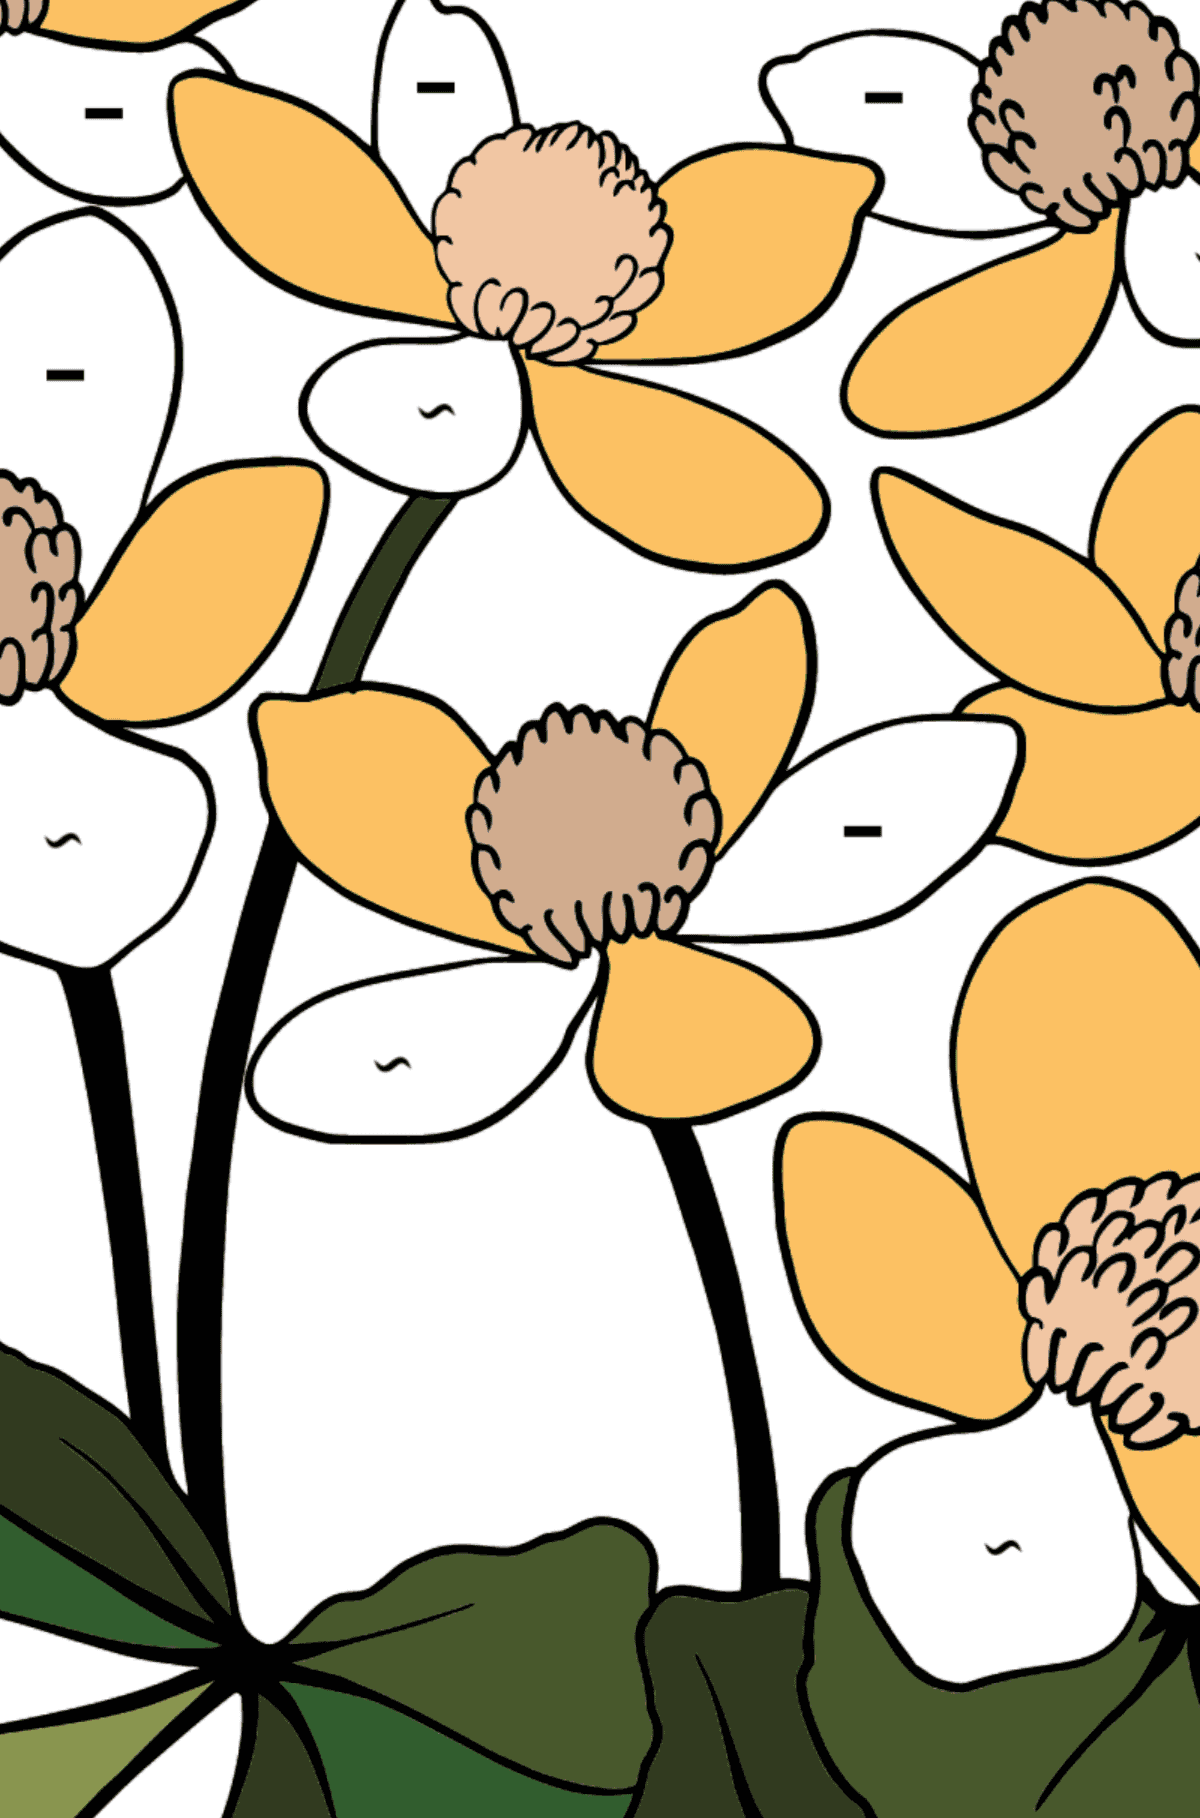 Flower Coloring Page - A Marsh Marigold with Yellow Petals - Coloring by Symbols and Geometric Shapes for Kids